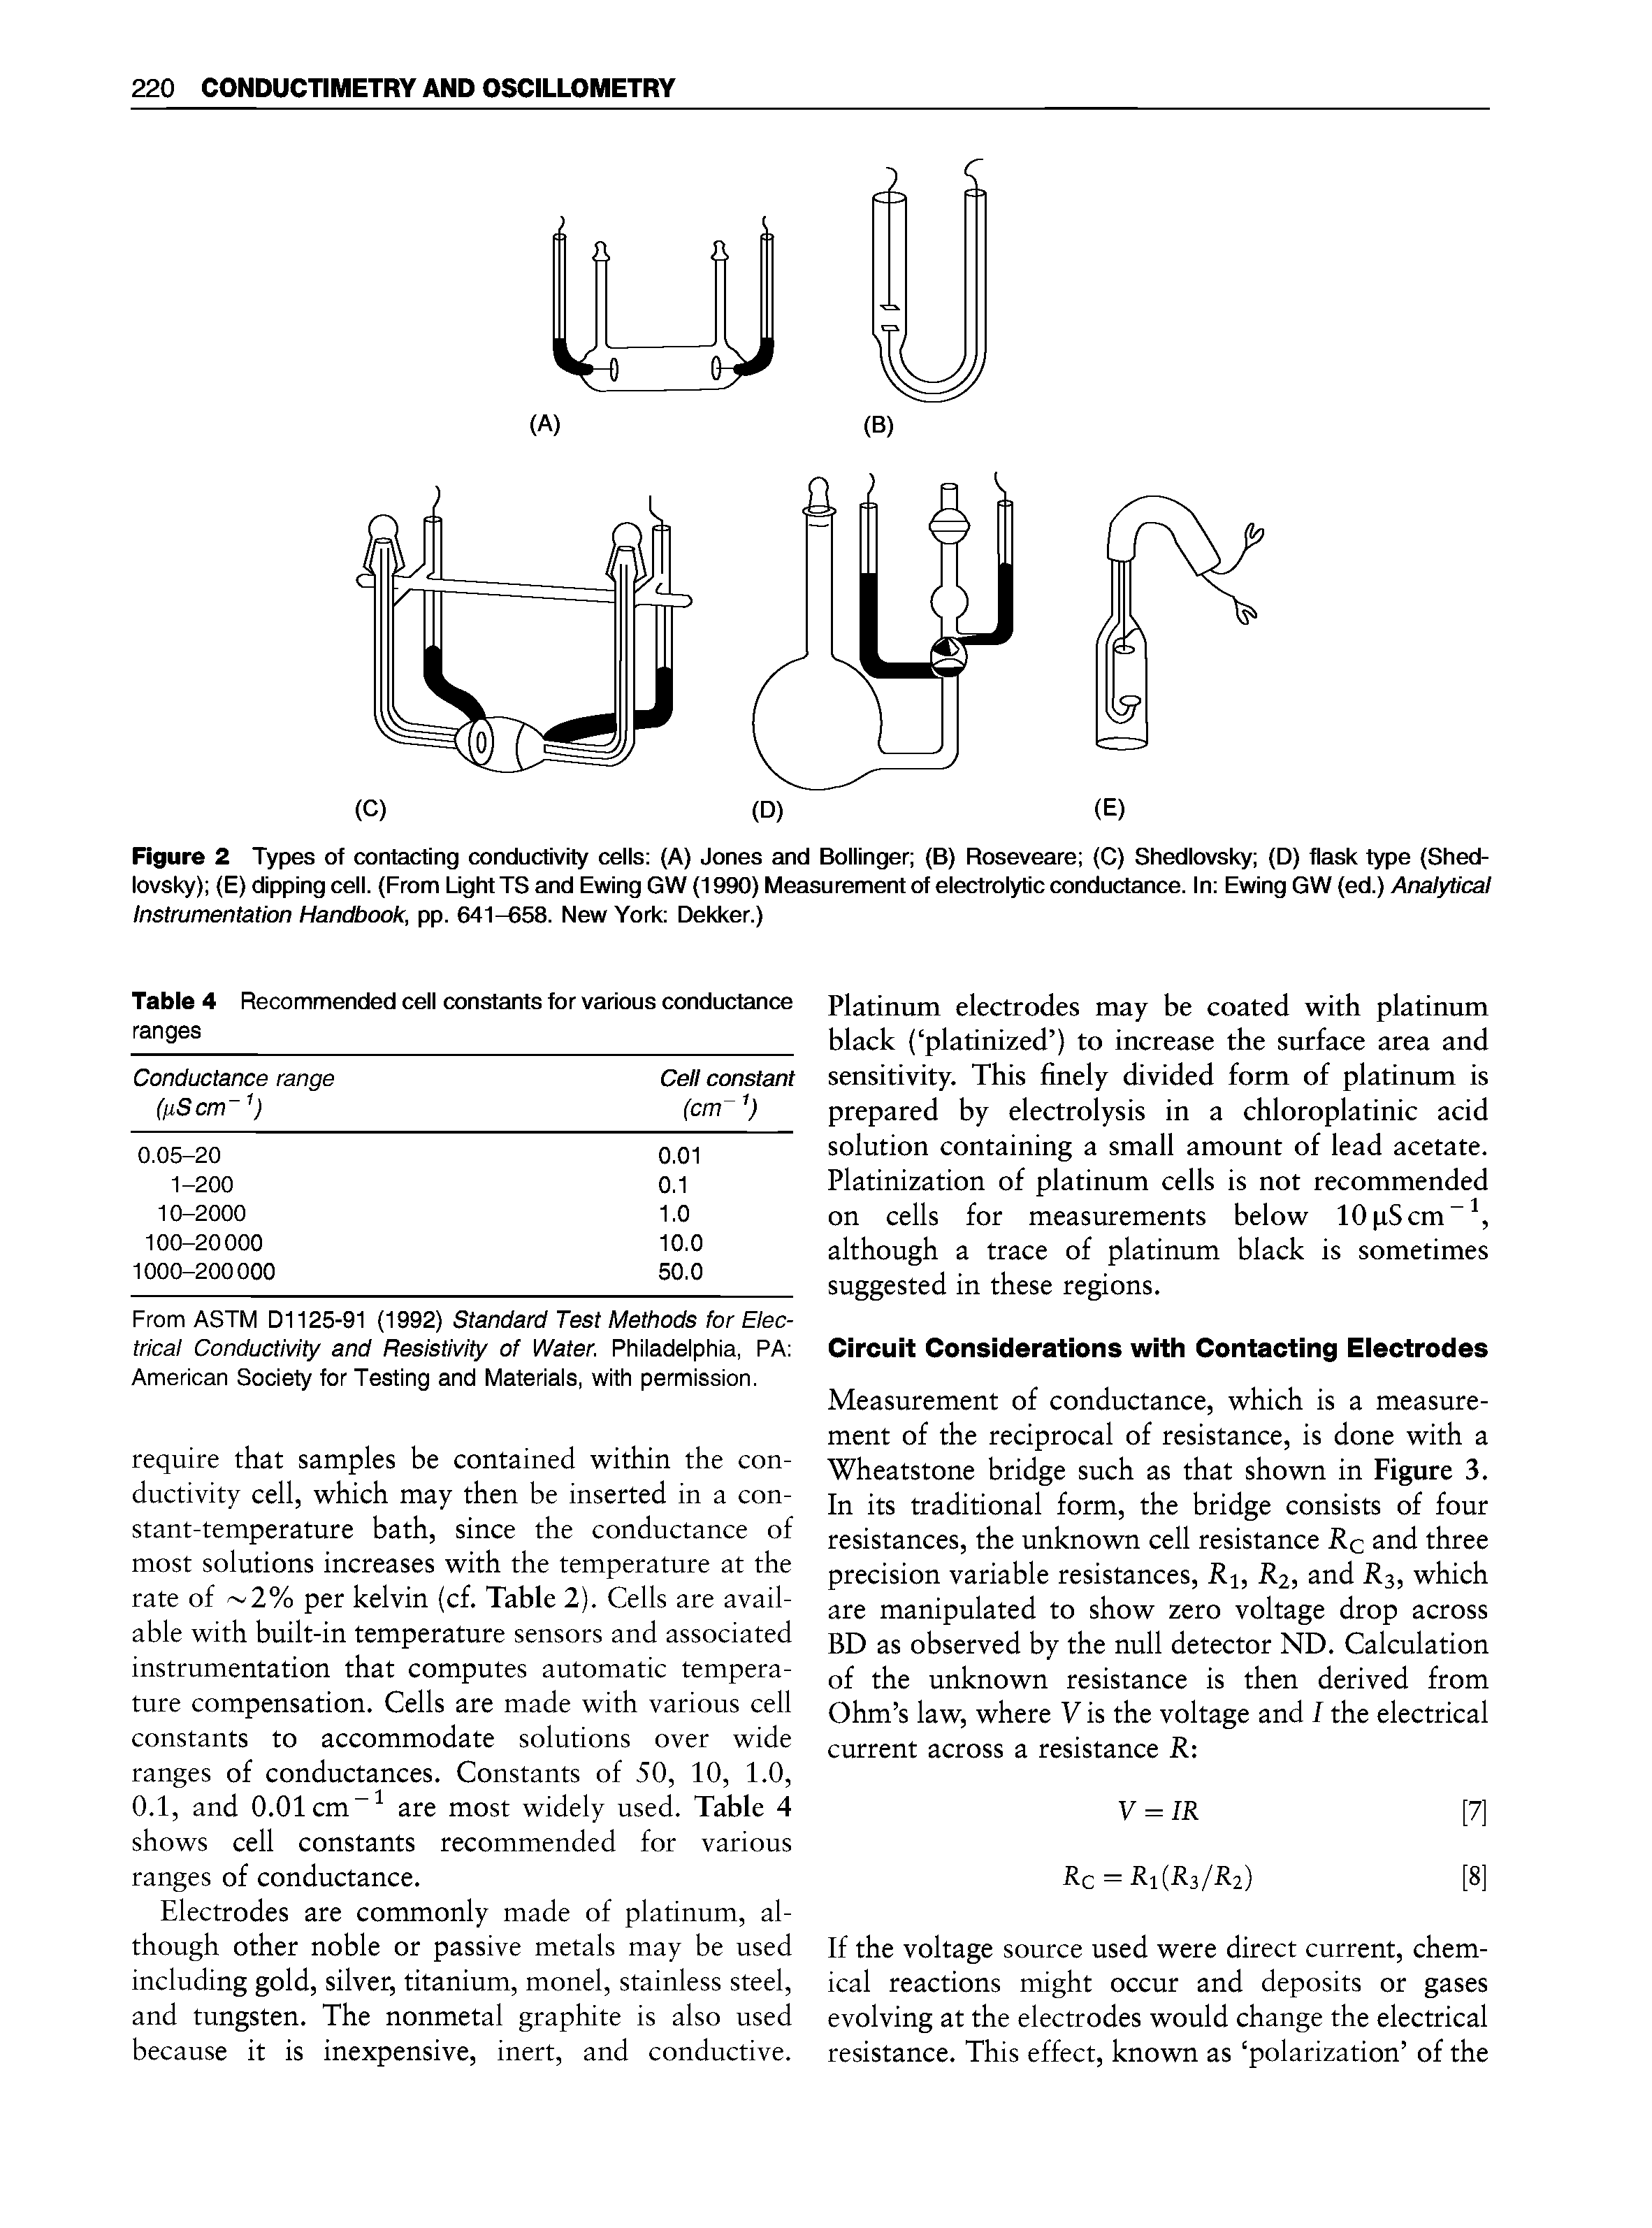 Figure 2 Types of contacting conductivity cells (A) Jones and Bollinger (B) Roseveare (C) Shedlovsky (D) flask type (Shed-lovsky) (E) dipping cell. (From Light TS and Ewing GW (1990) Measurement of electrolytic conductance. In Ewing GW (ed.) Analytical Instrumentation Handbook, pp. 641-658. New York Dekker.)...